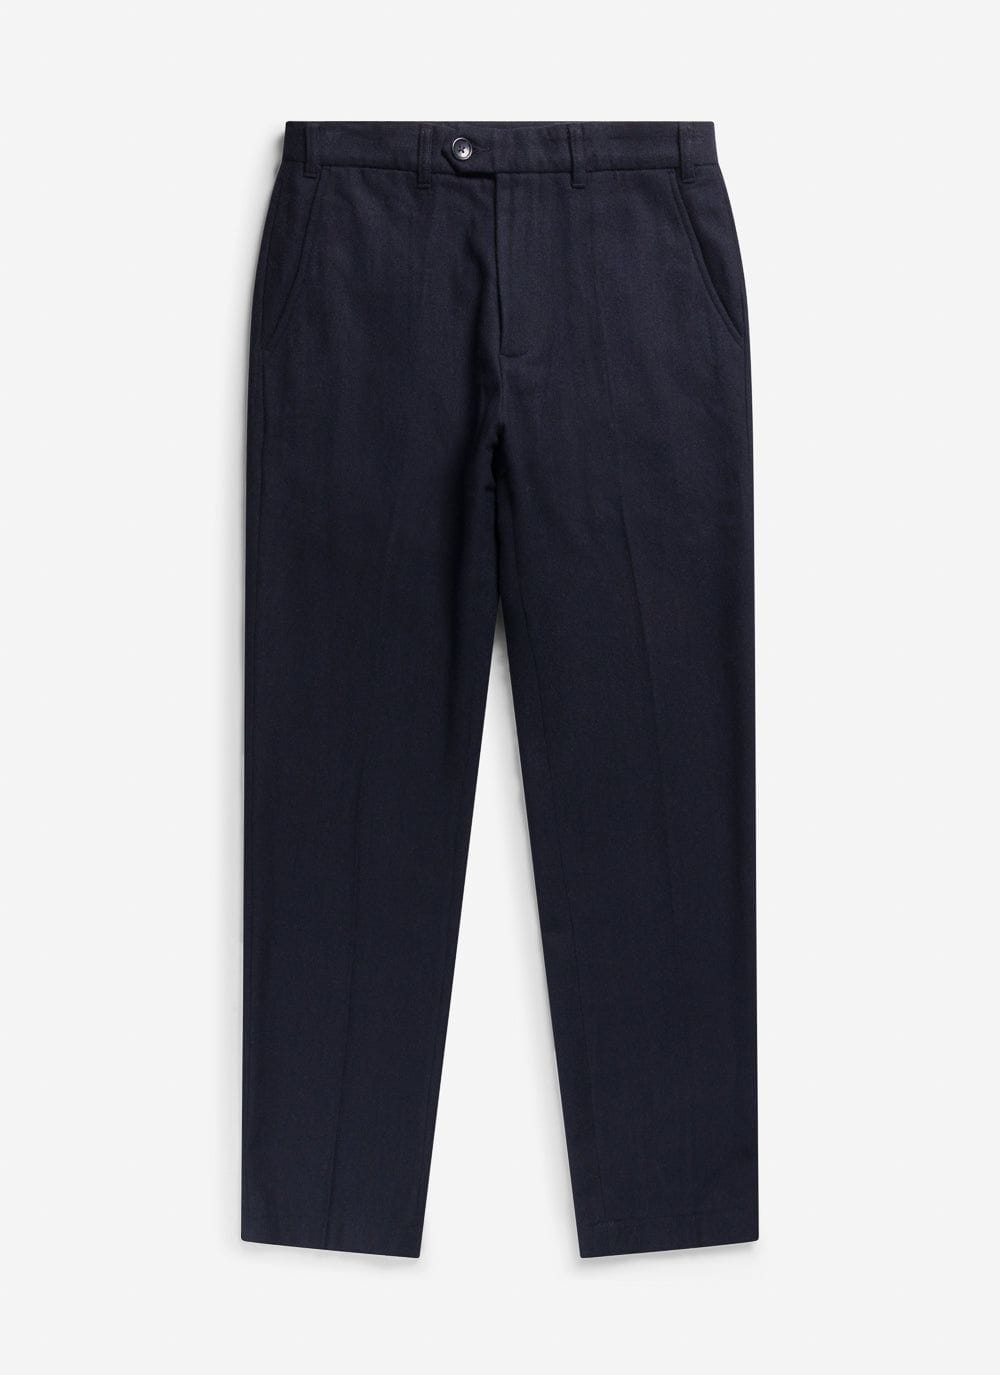 Tailored Wool Trousers | Navy & Percival Menswear